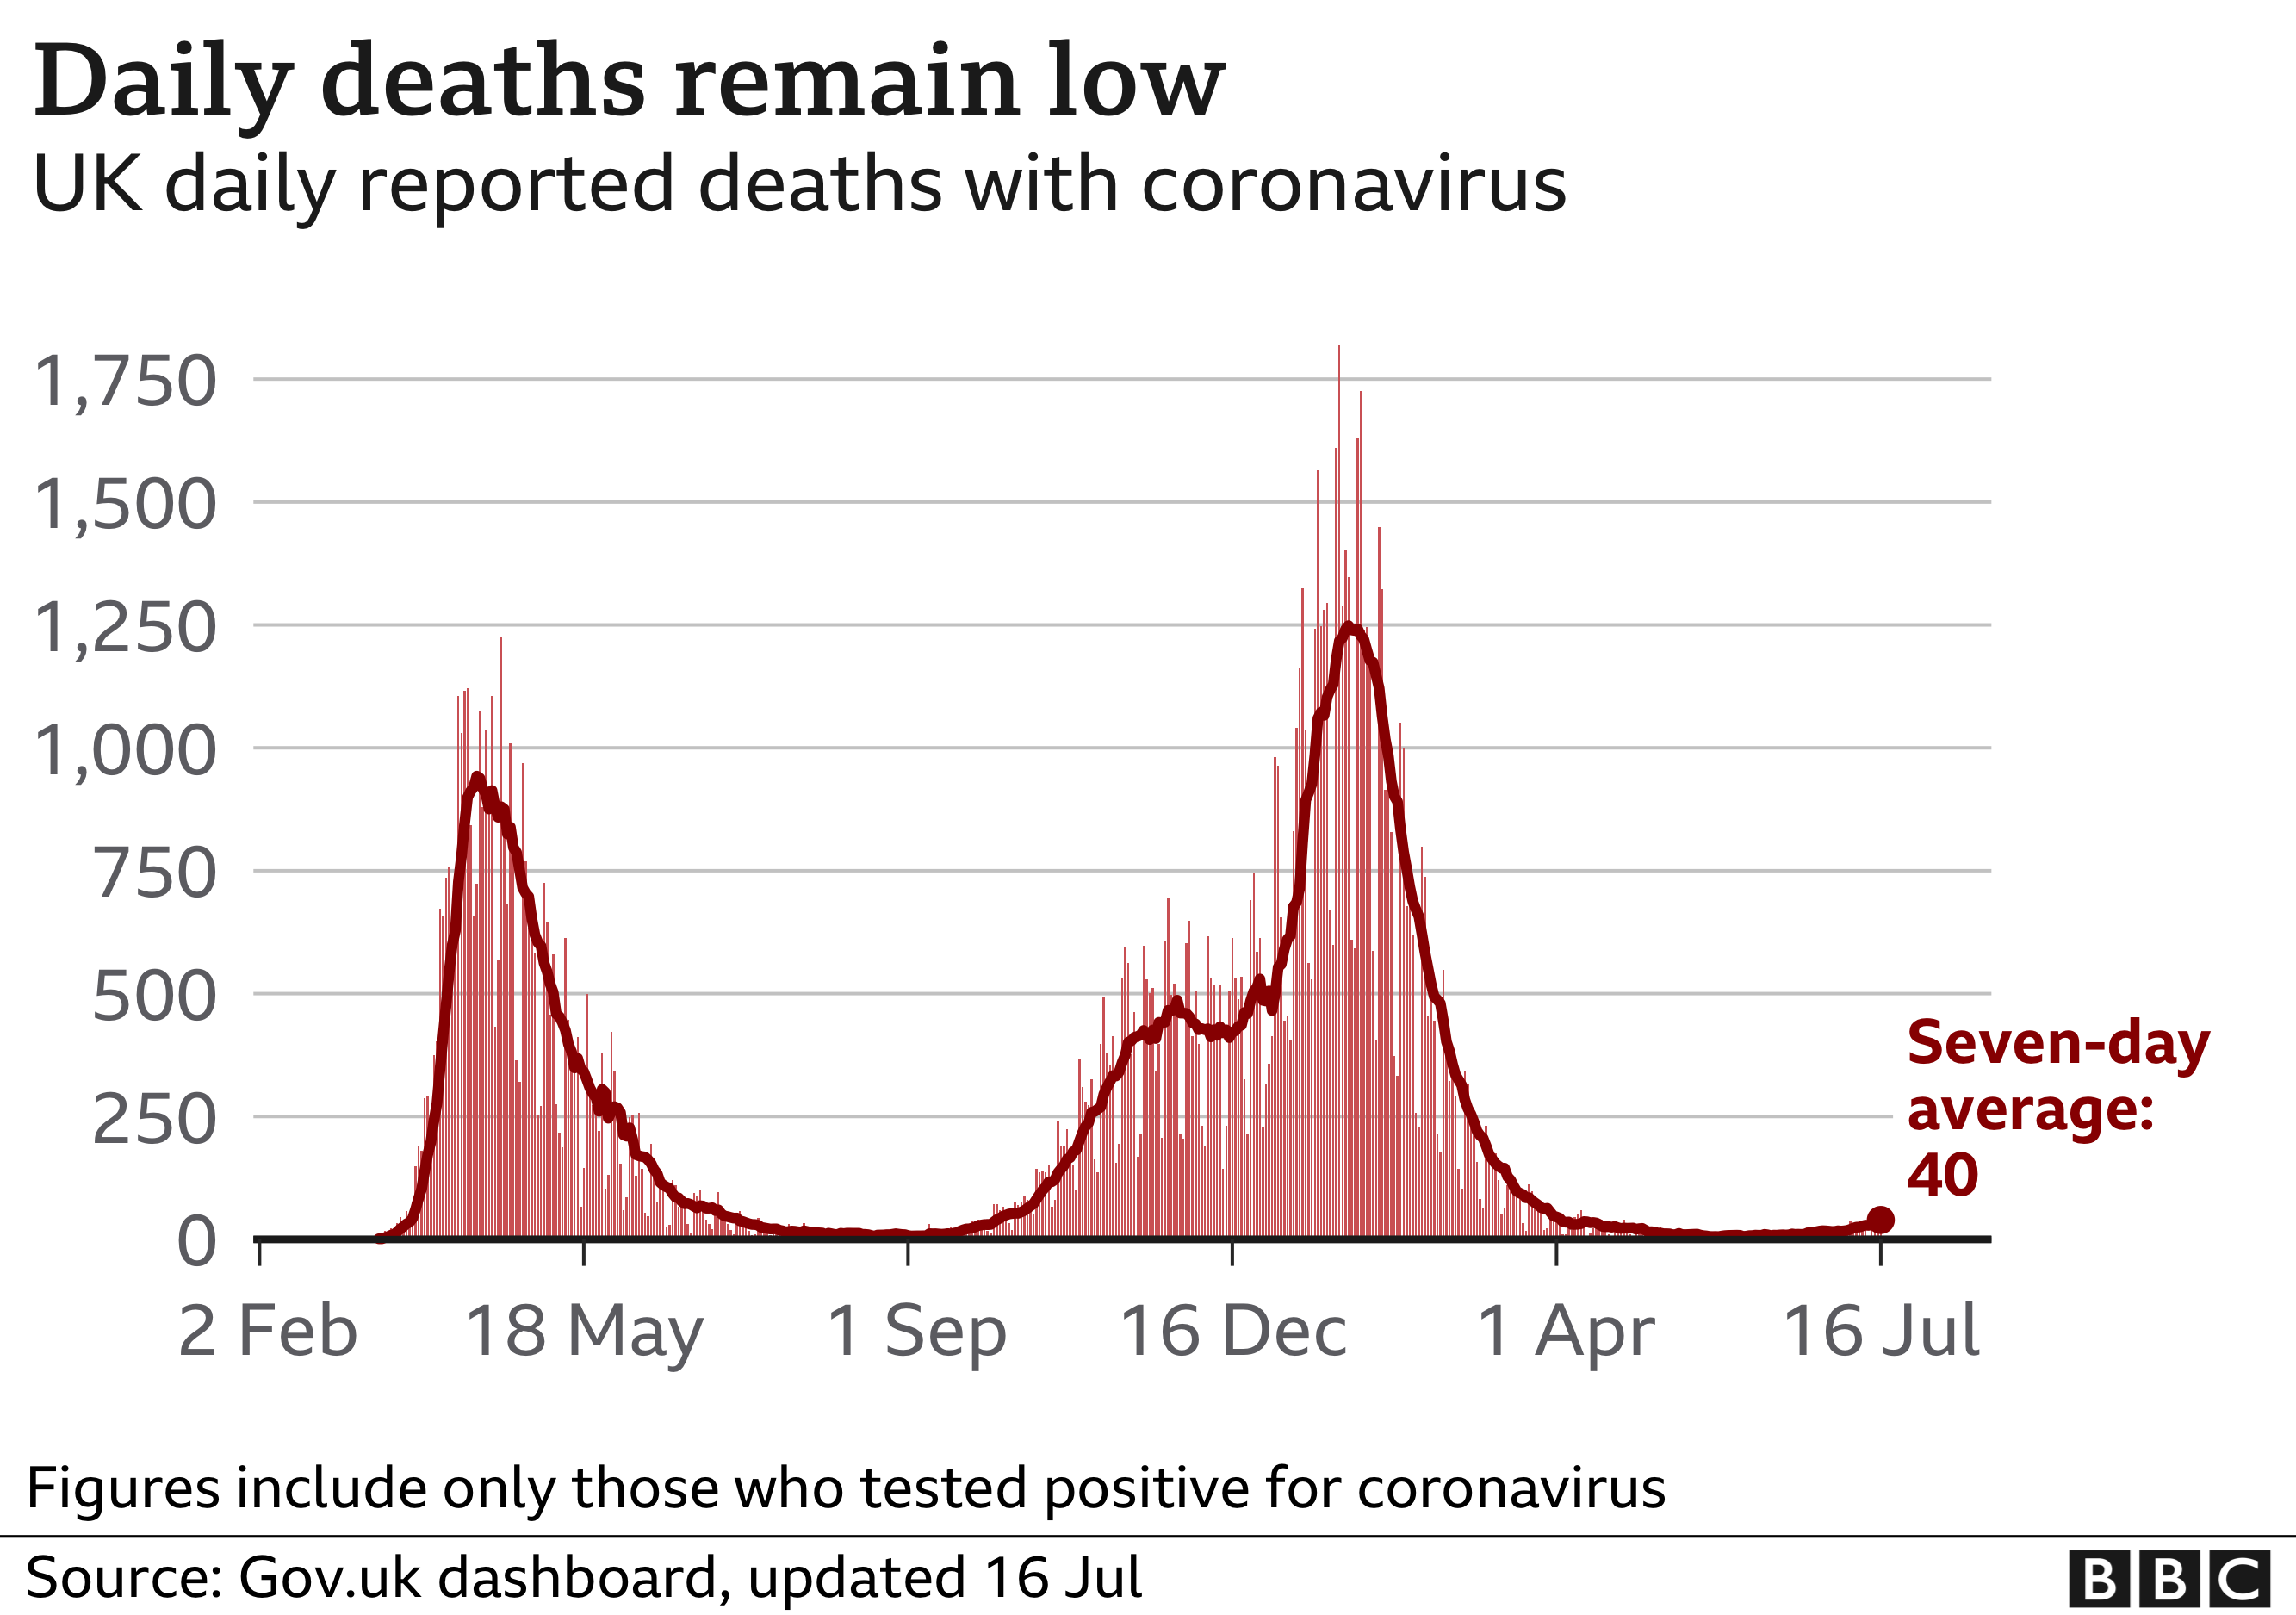 Chart showing that the number of daily deaths remains low at the moment